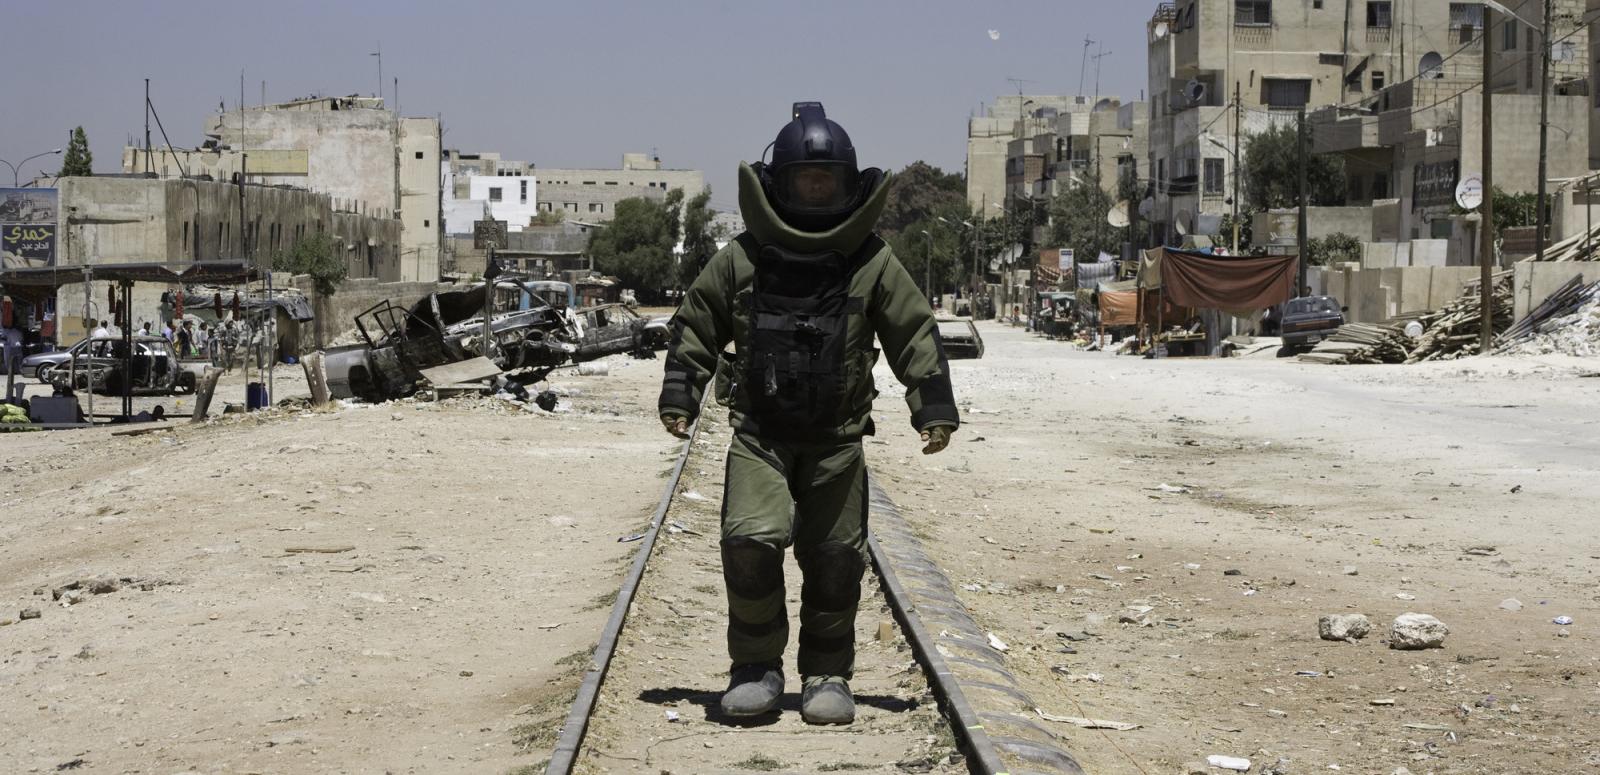 A lonely figure wearing bomb disposal protection walks toward the camera.